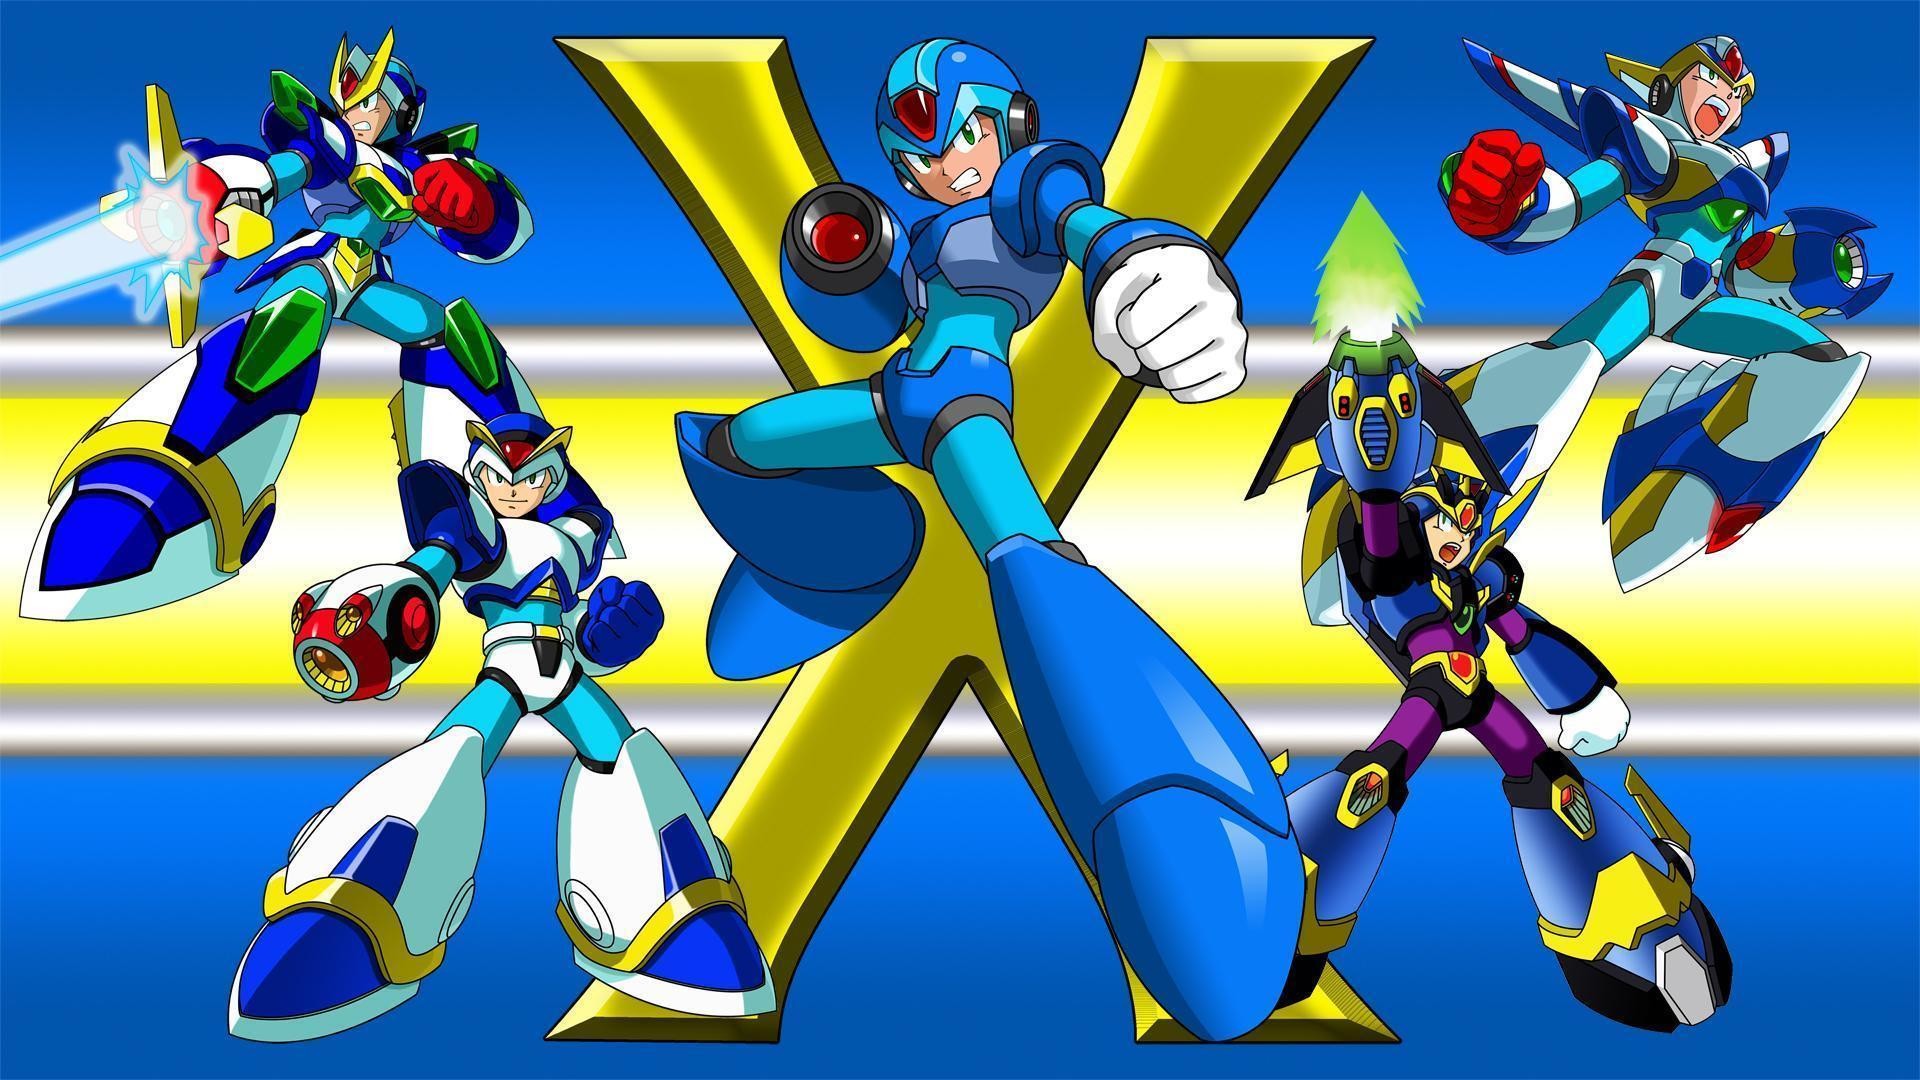 1920x1080 Megaman images Megaman x (shadow armor) wallpaper and background .